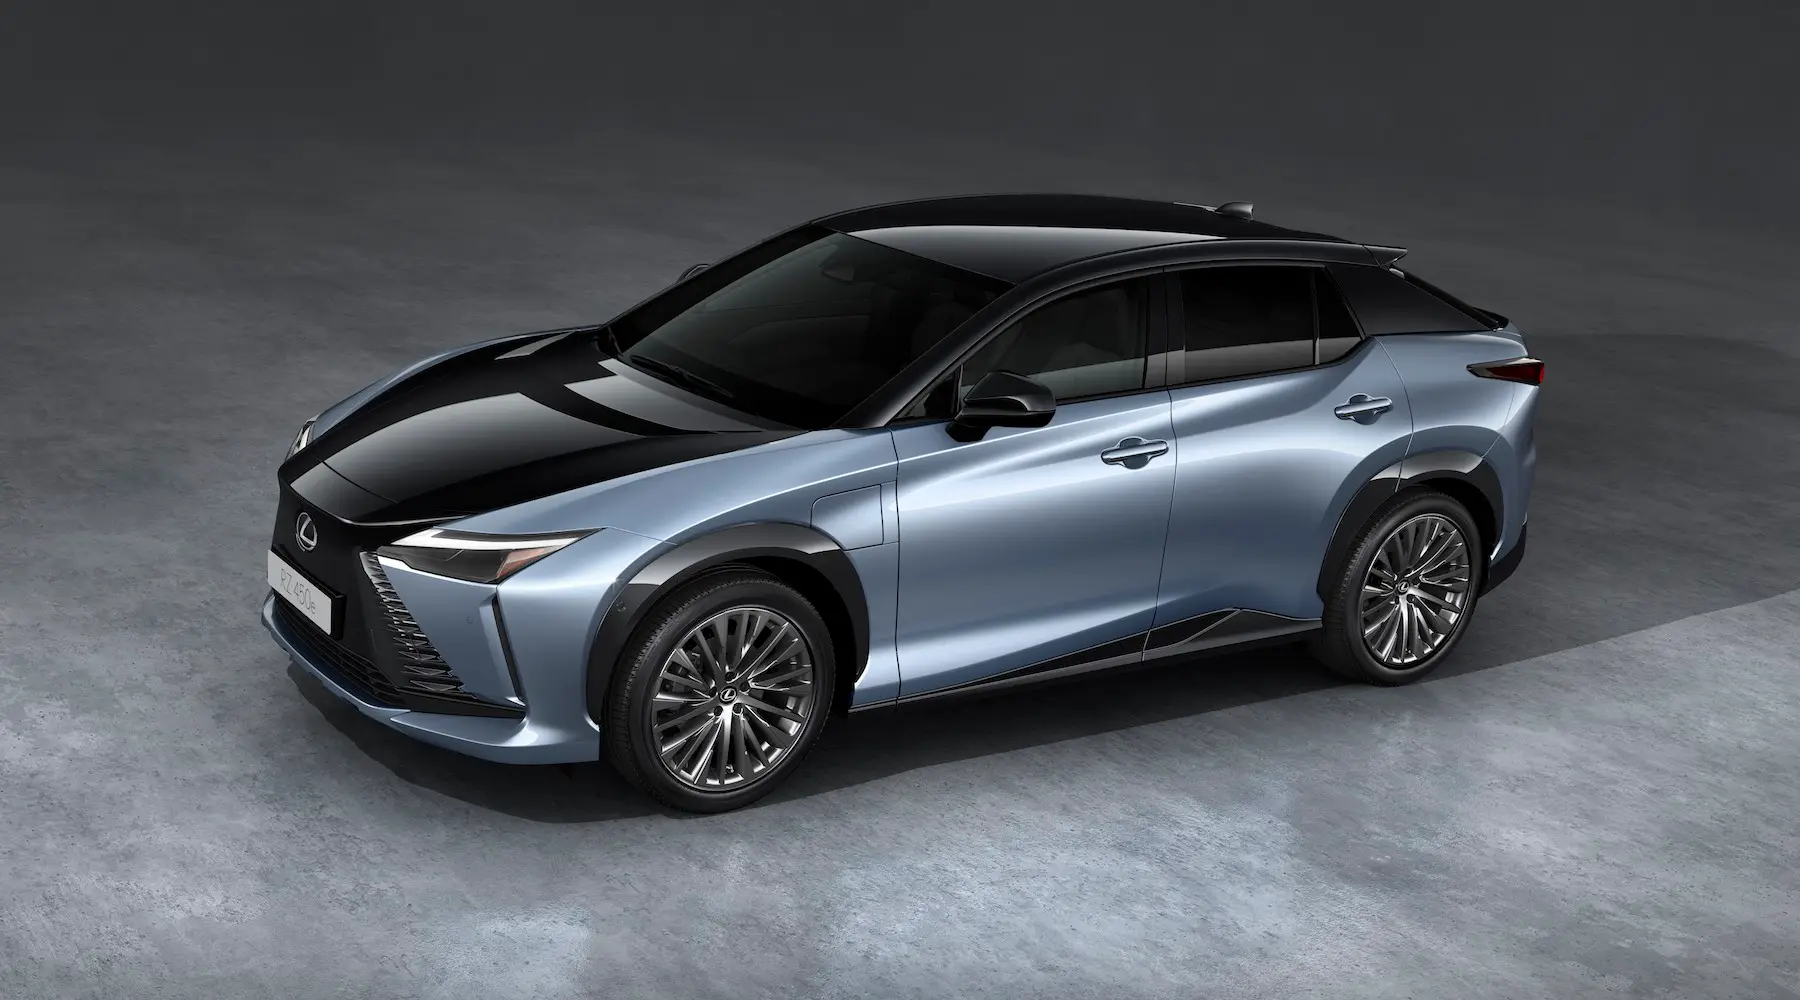 2023-lexus-rz-450e-revealed-brand-s-first-standalone-ev-model-to-offer